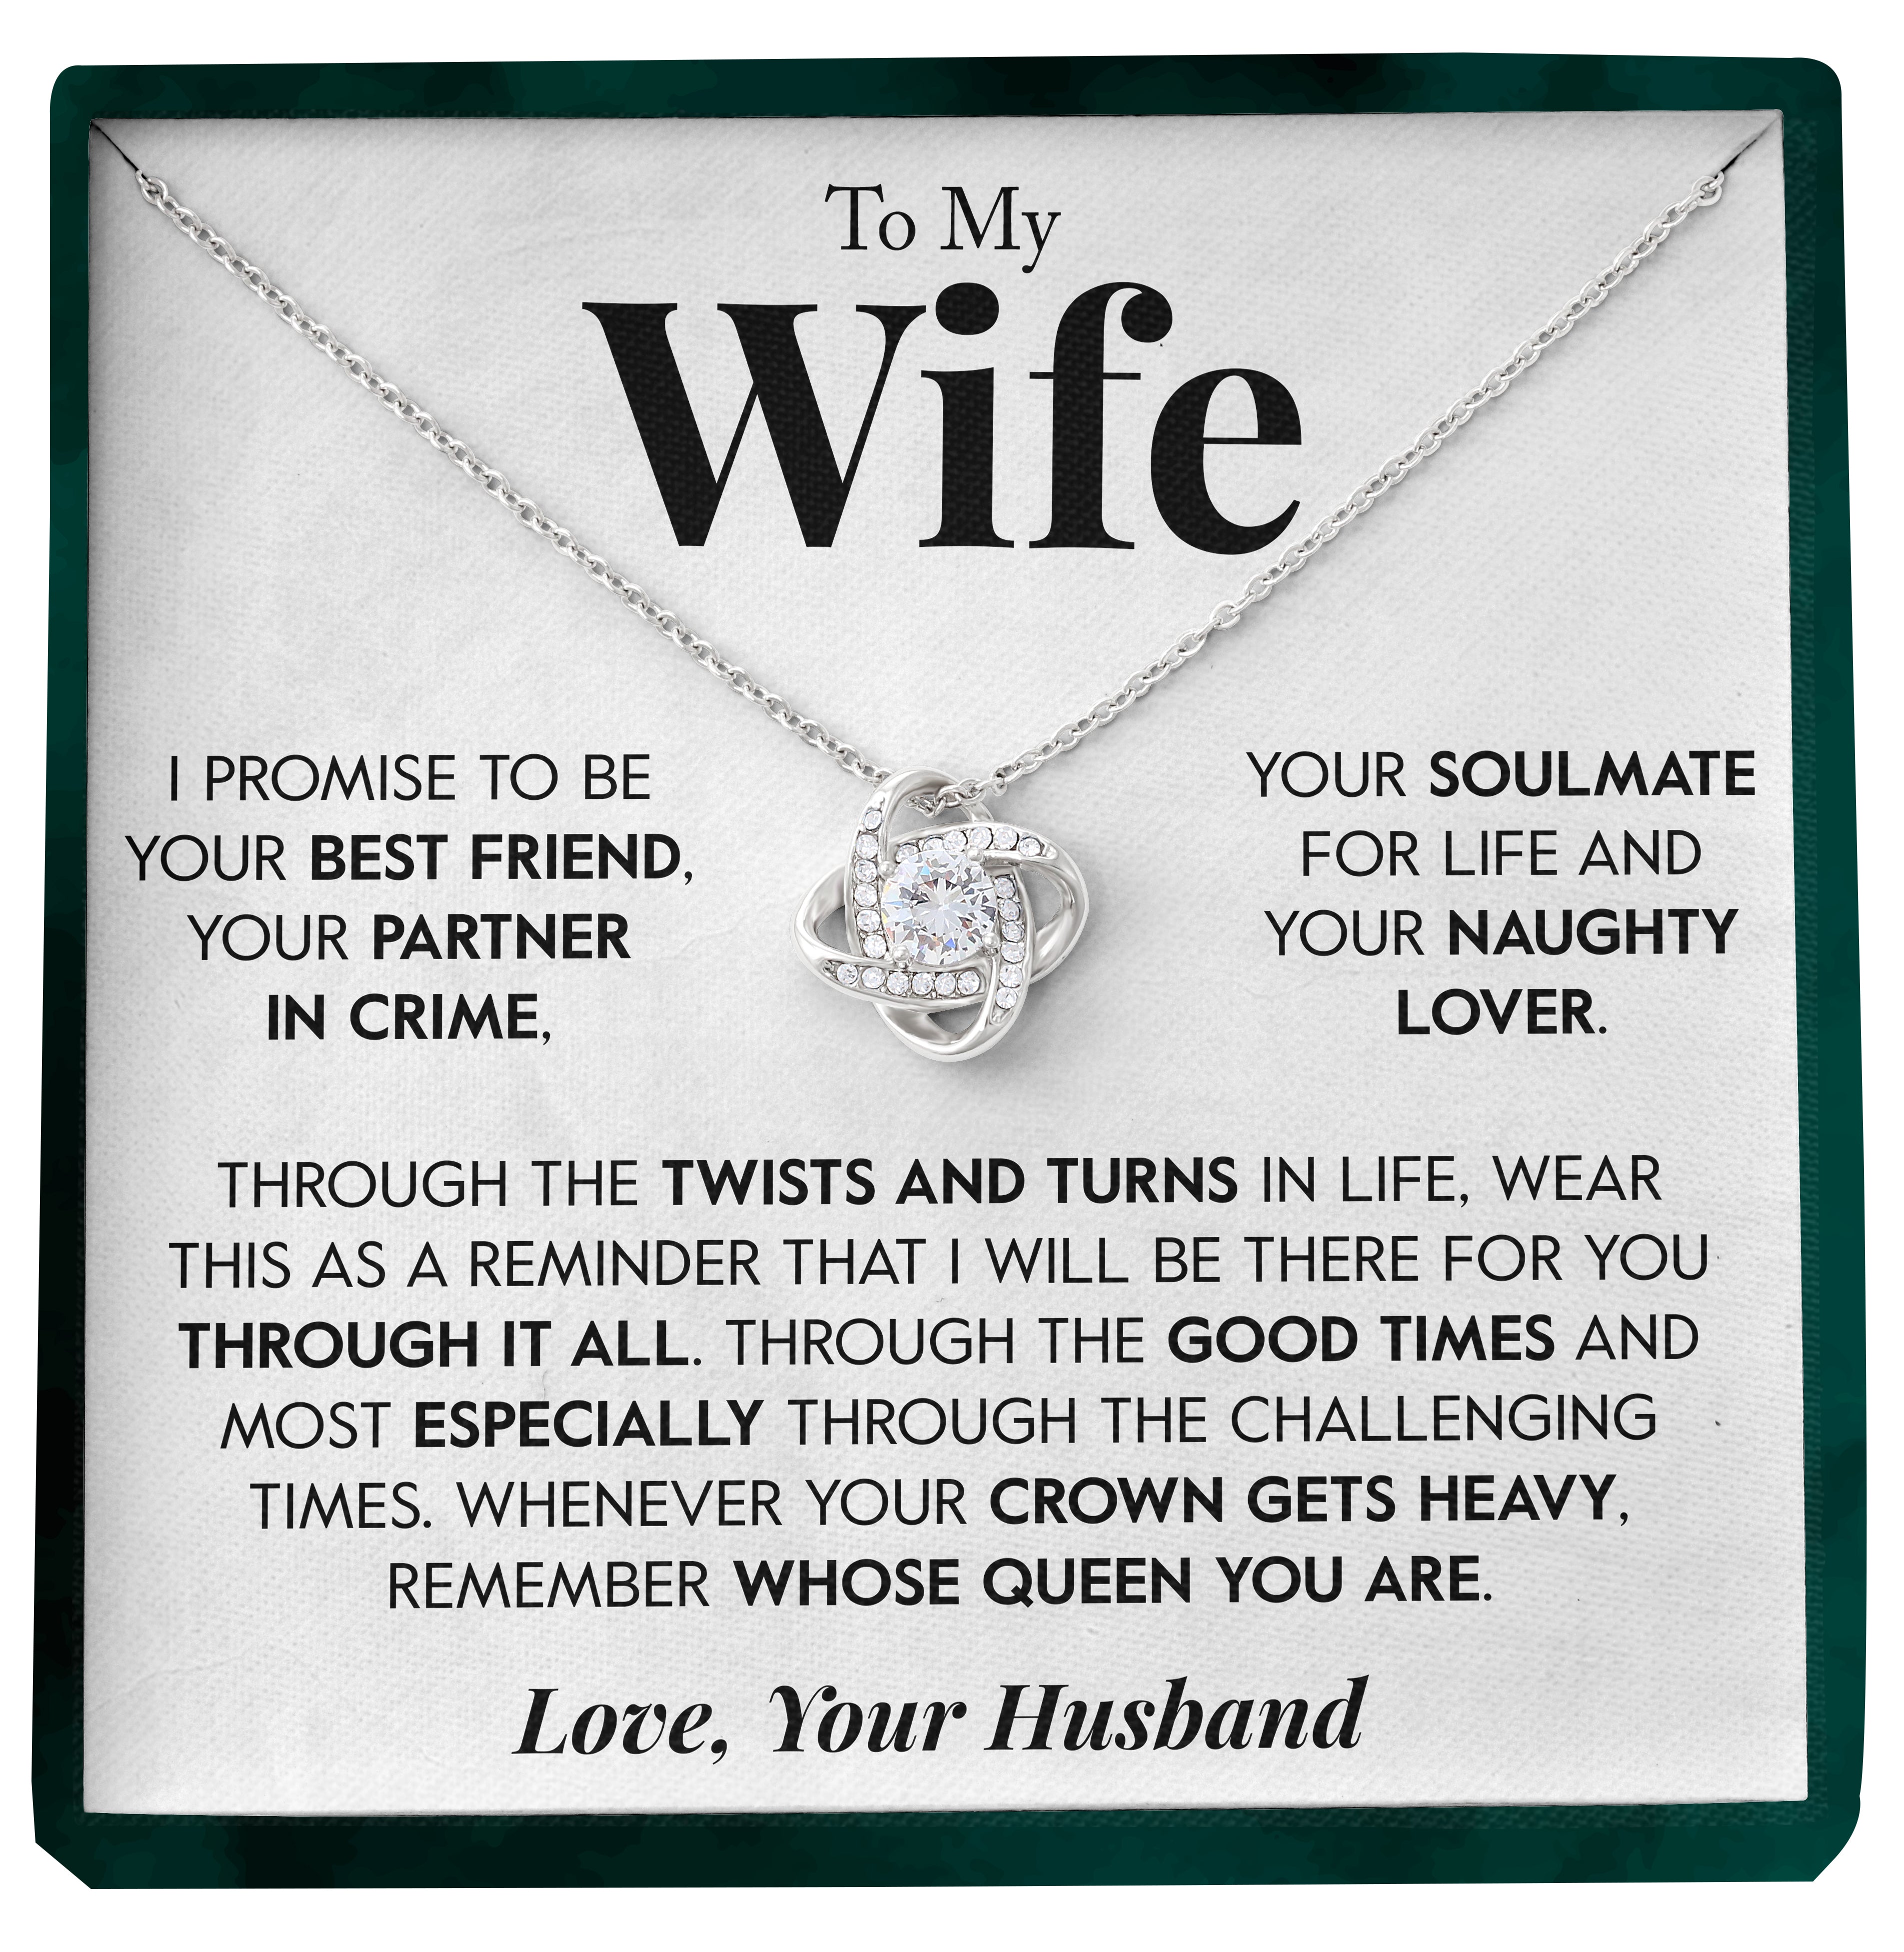 To My Wife | "Naughty Lover" | Love Knot Necklace